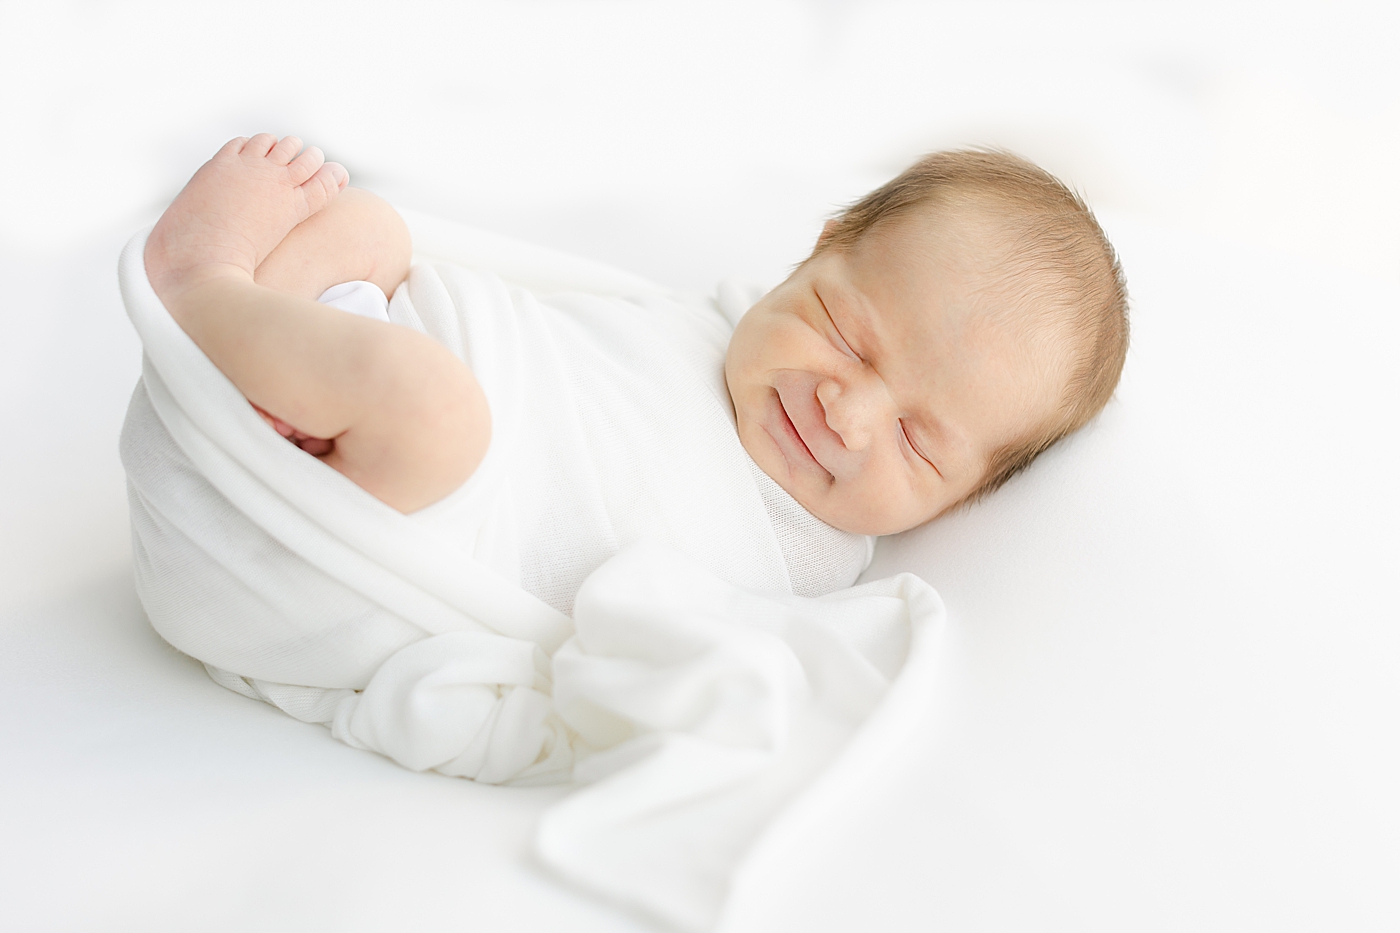 Smiling newborb baby in a white swaddle | Image by Sana Ahmed Photography 